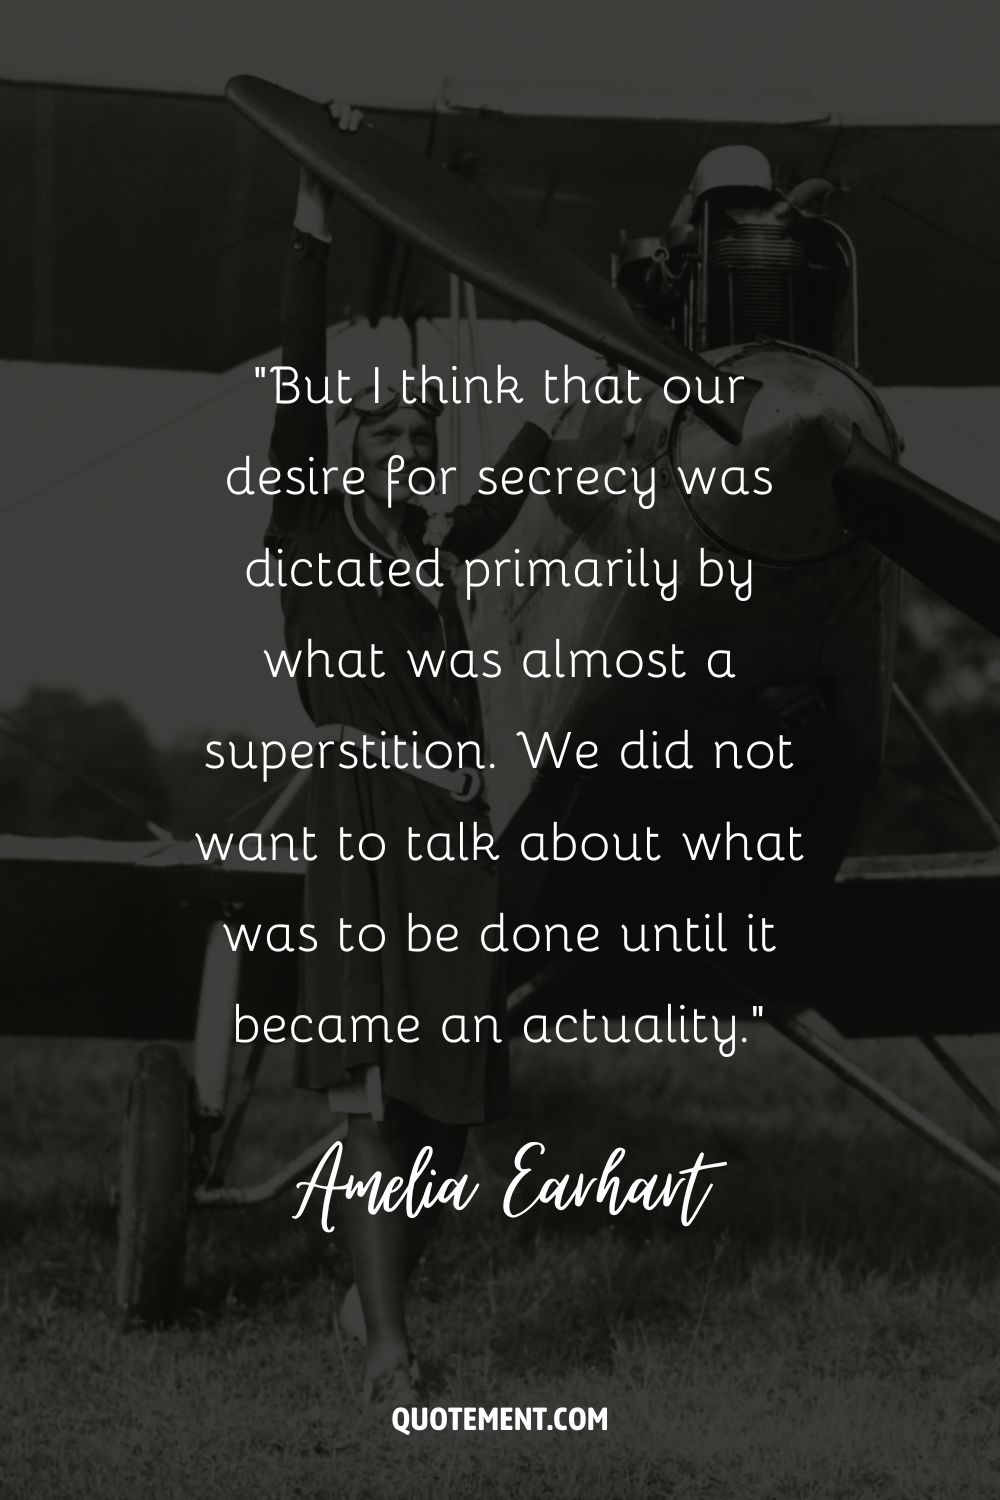 “But I think that our desire for secrecy was dictated primarily by what was almost a superstition.